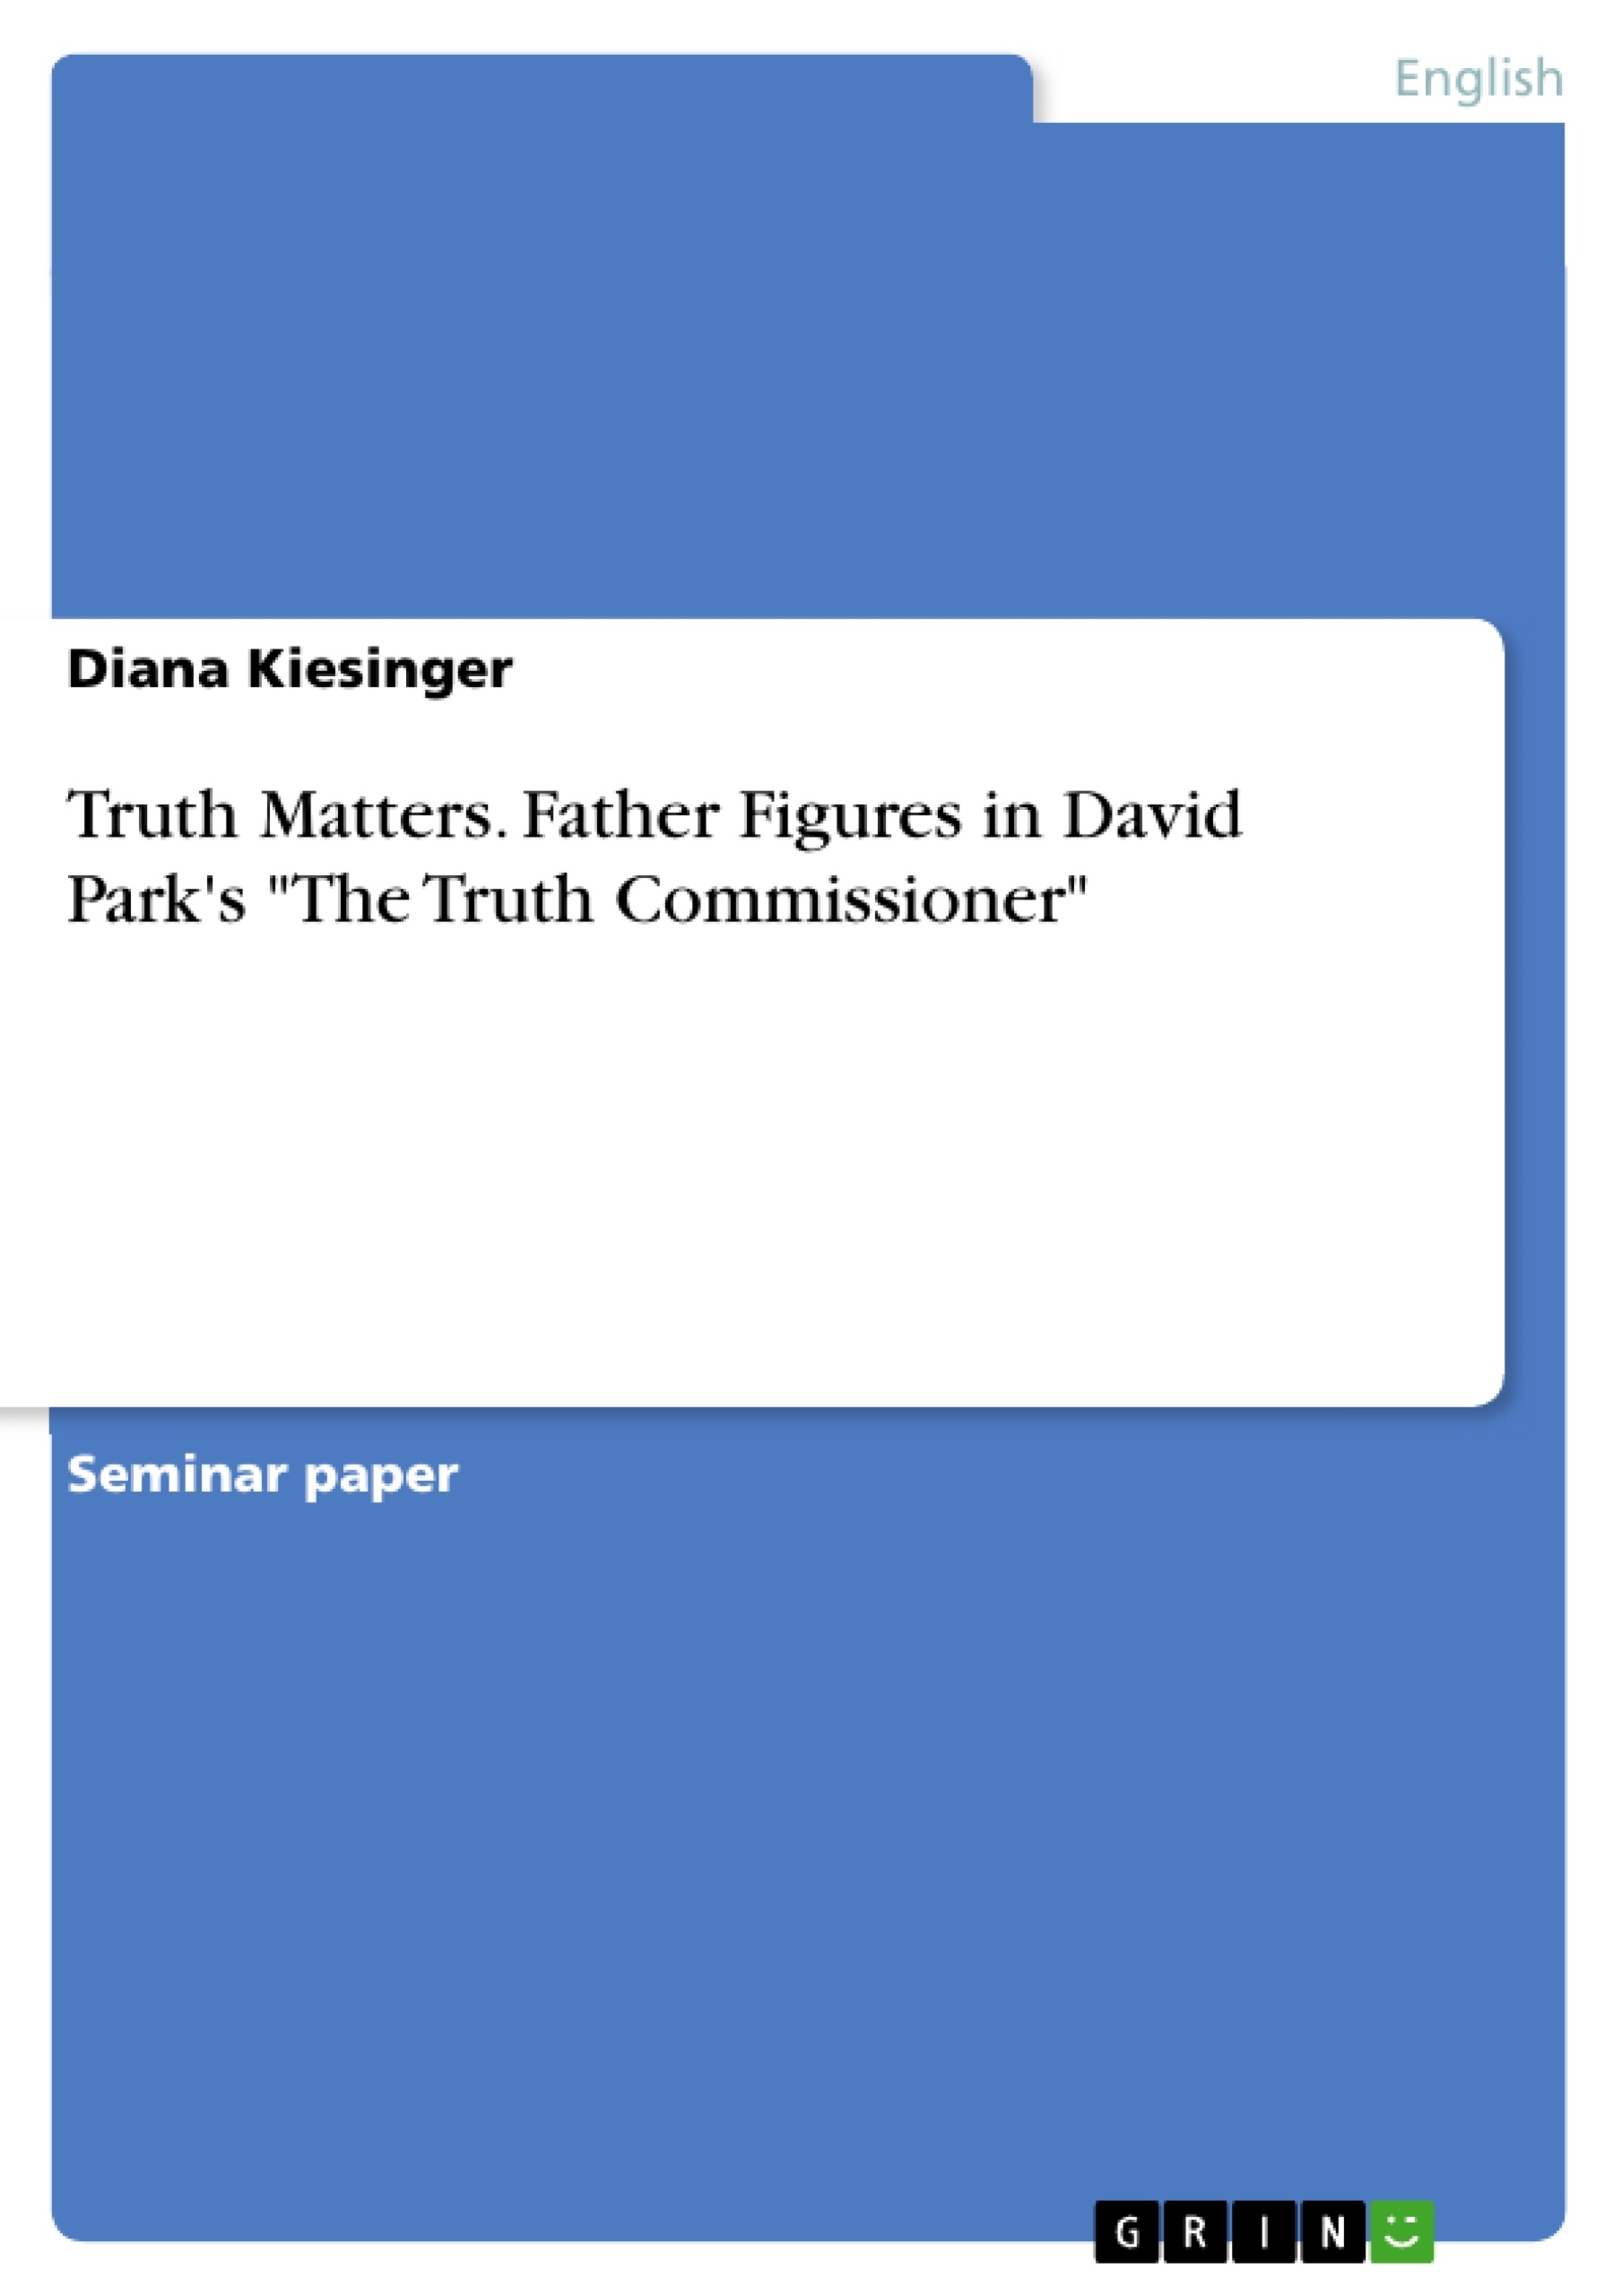 Titre: Truth Matters. Father Figures in David Park's "The Truth Commissioner"